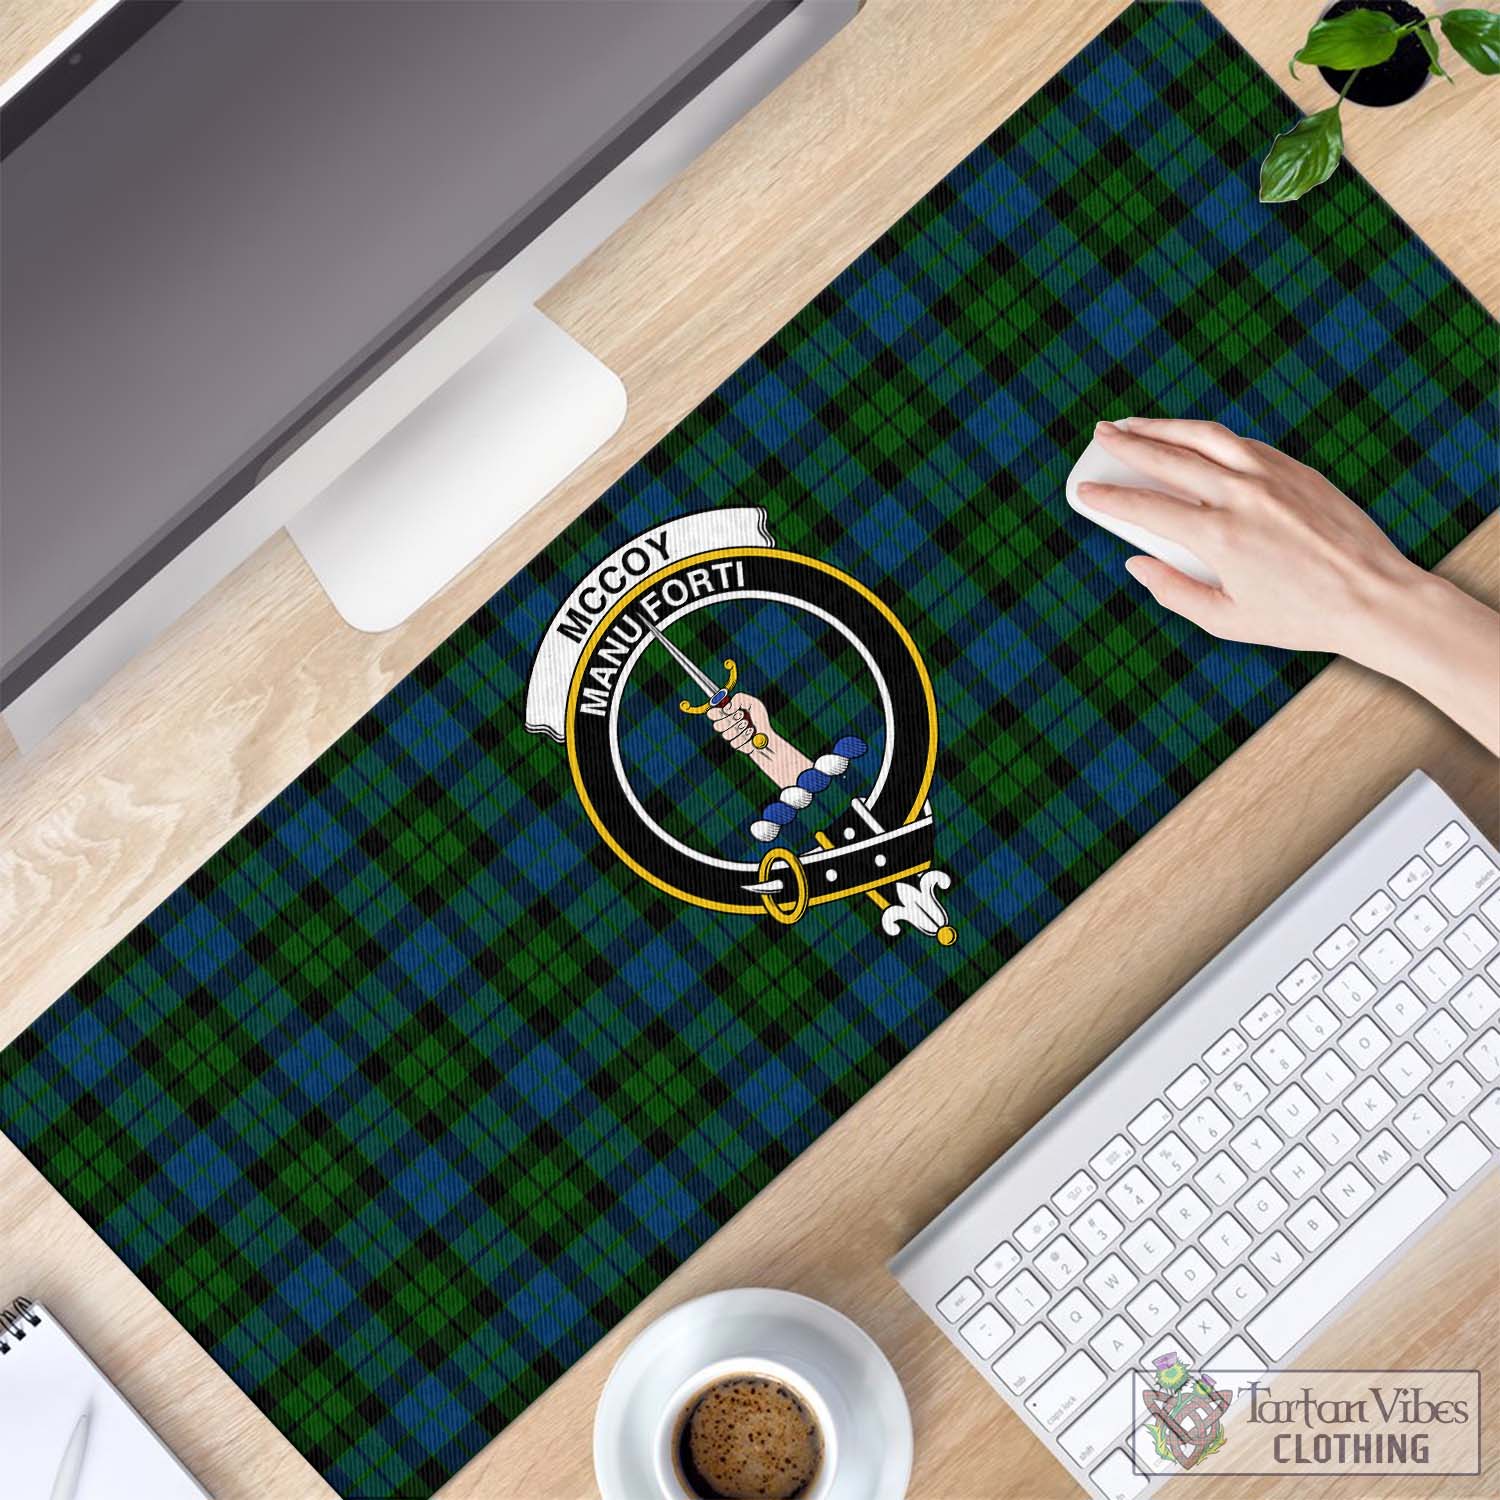 Tartan Vibes Clothing McCoy Tartan Mouse Pad with Family Crest